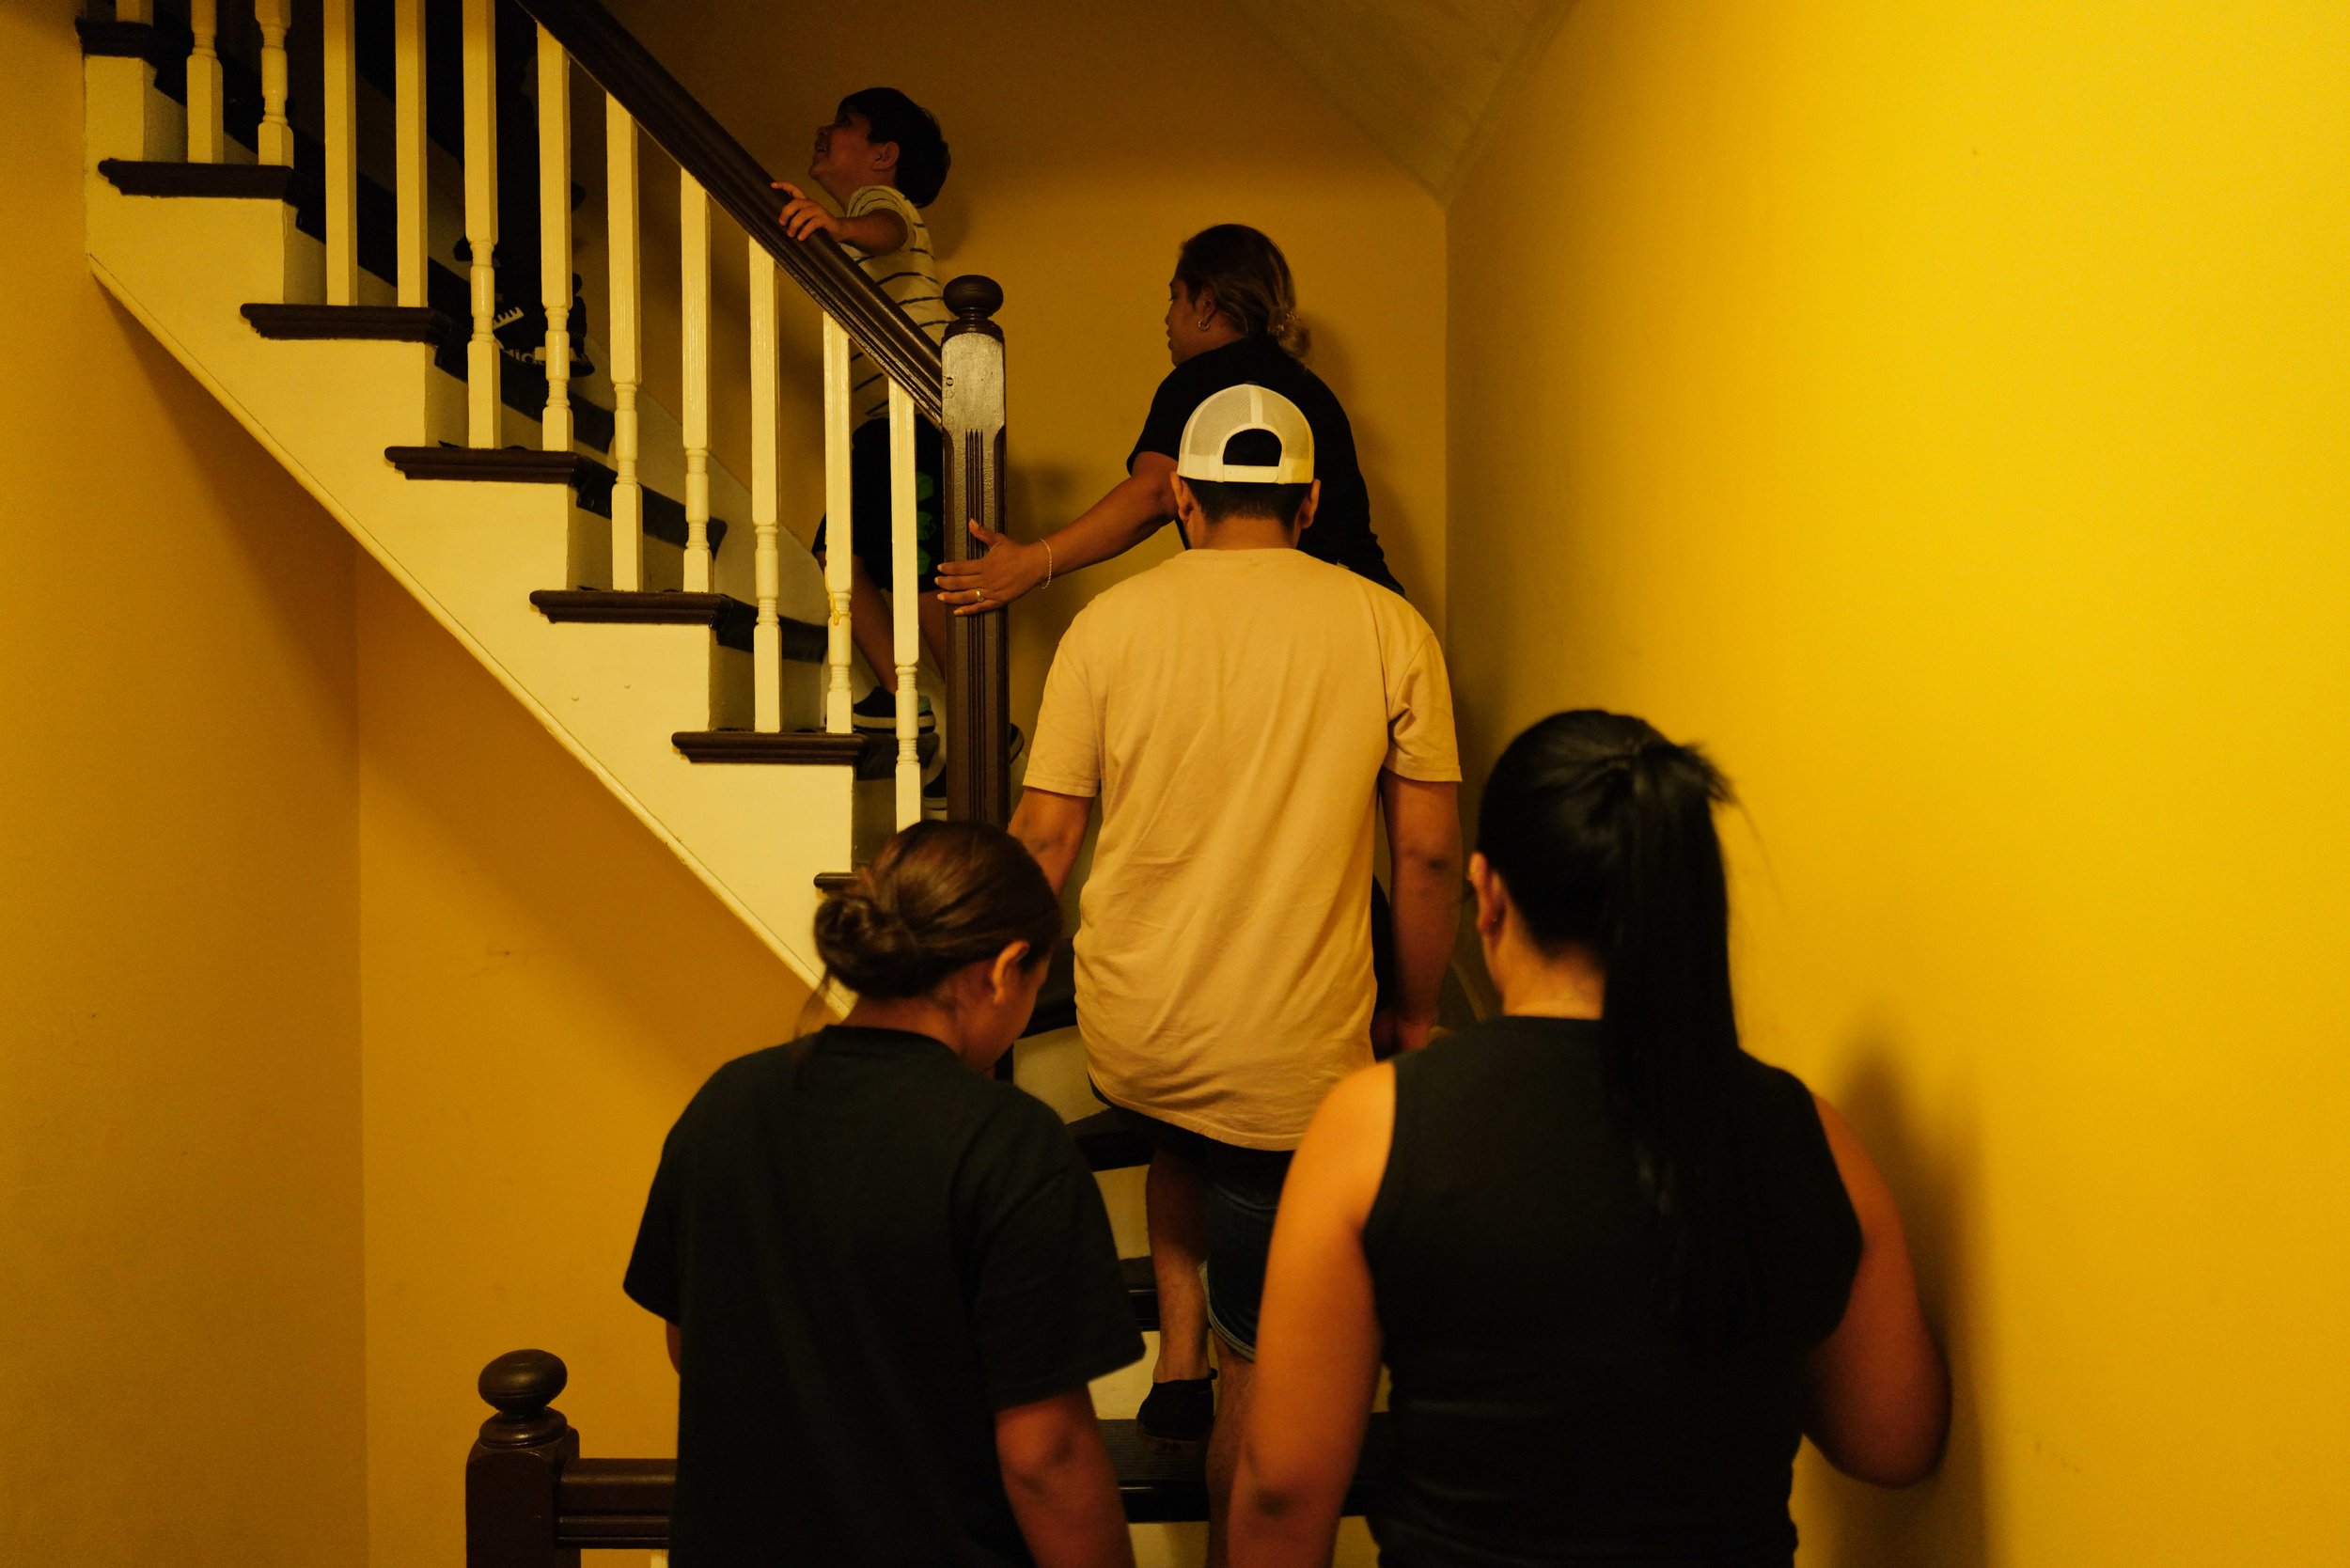  From top left) Raul Alexis, 6, Teresa, Melquencedec Anthony, Fernanda Aimee, 12, and Kairy Lisbeth, 17, walk up the stairs to their new home right before midnight in Somerville, Mass. on Sept. 1, 2022. 